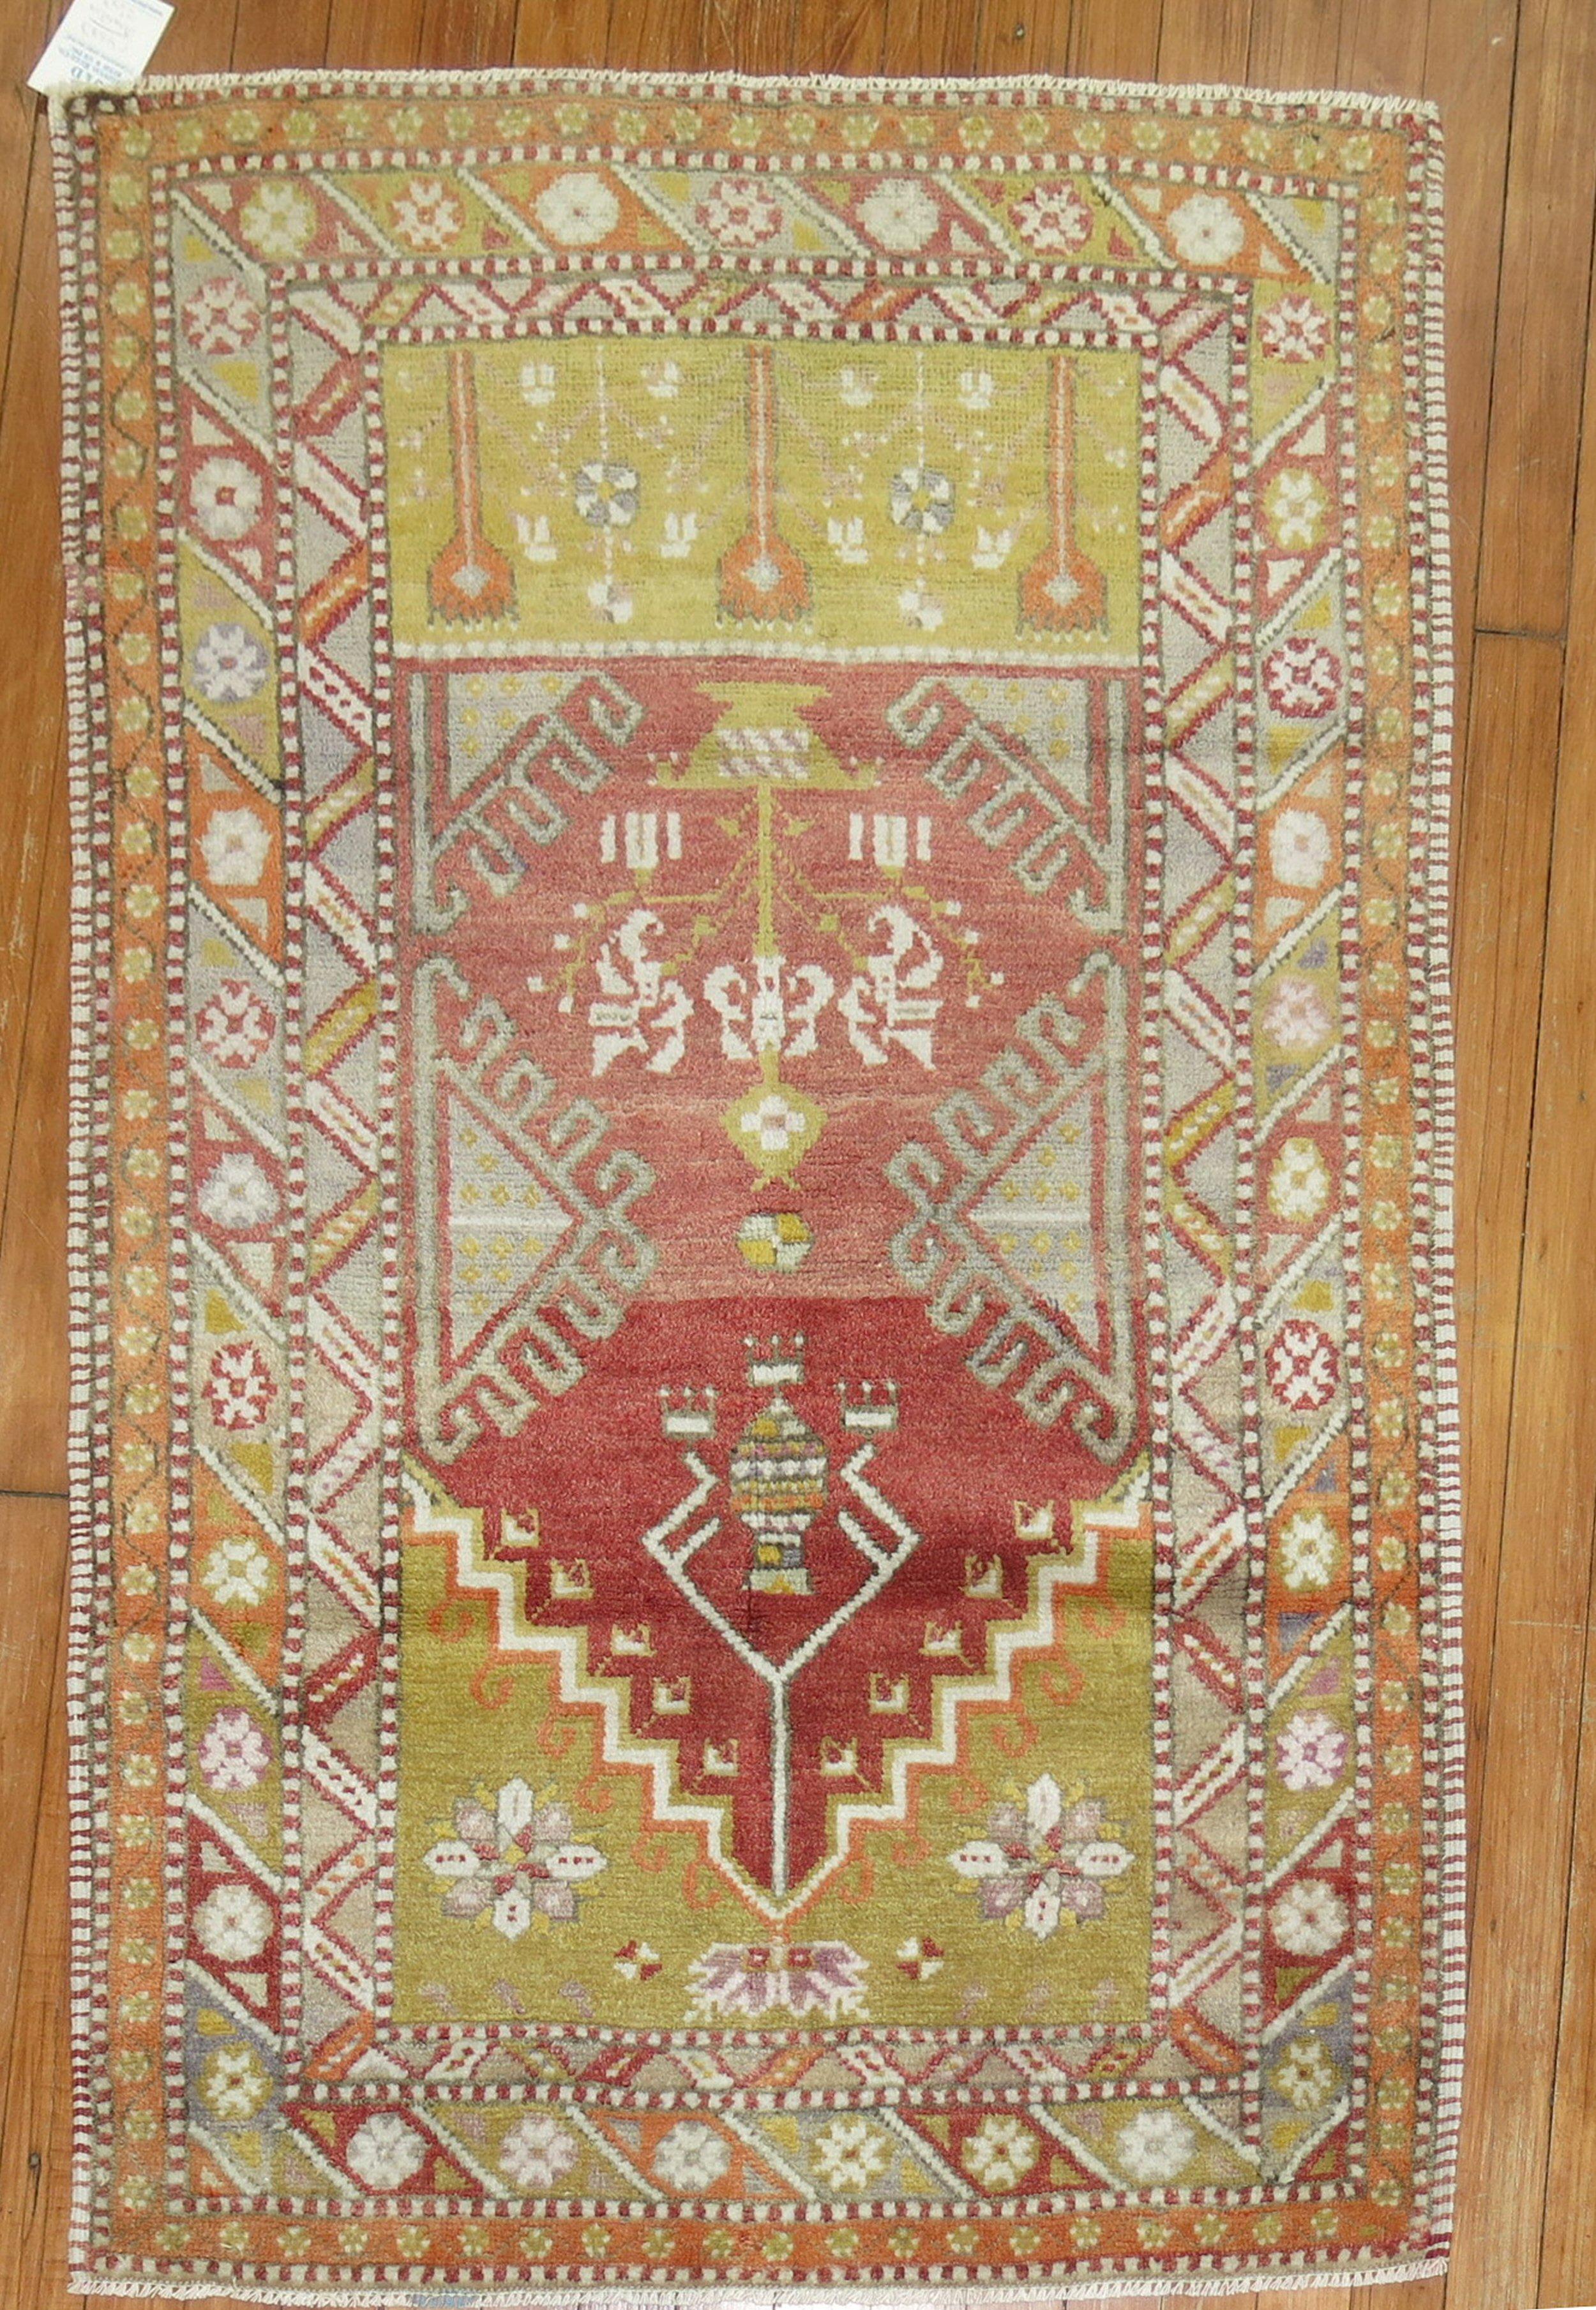 Hand-Knotted Soft Red Light Green Gray Accent Geometric Turkish Anatolian Scatter Size Rug